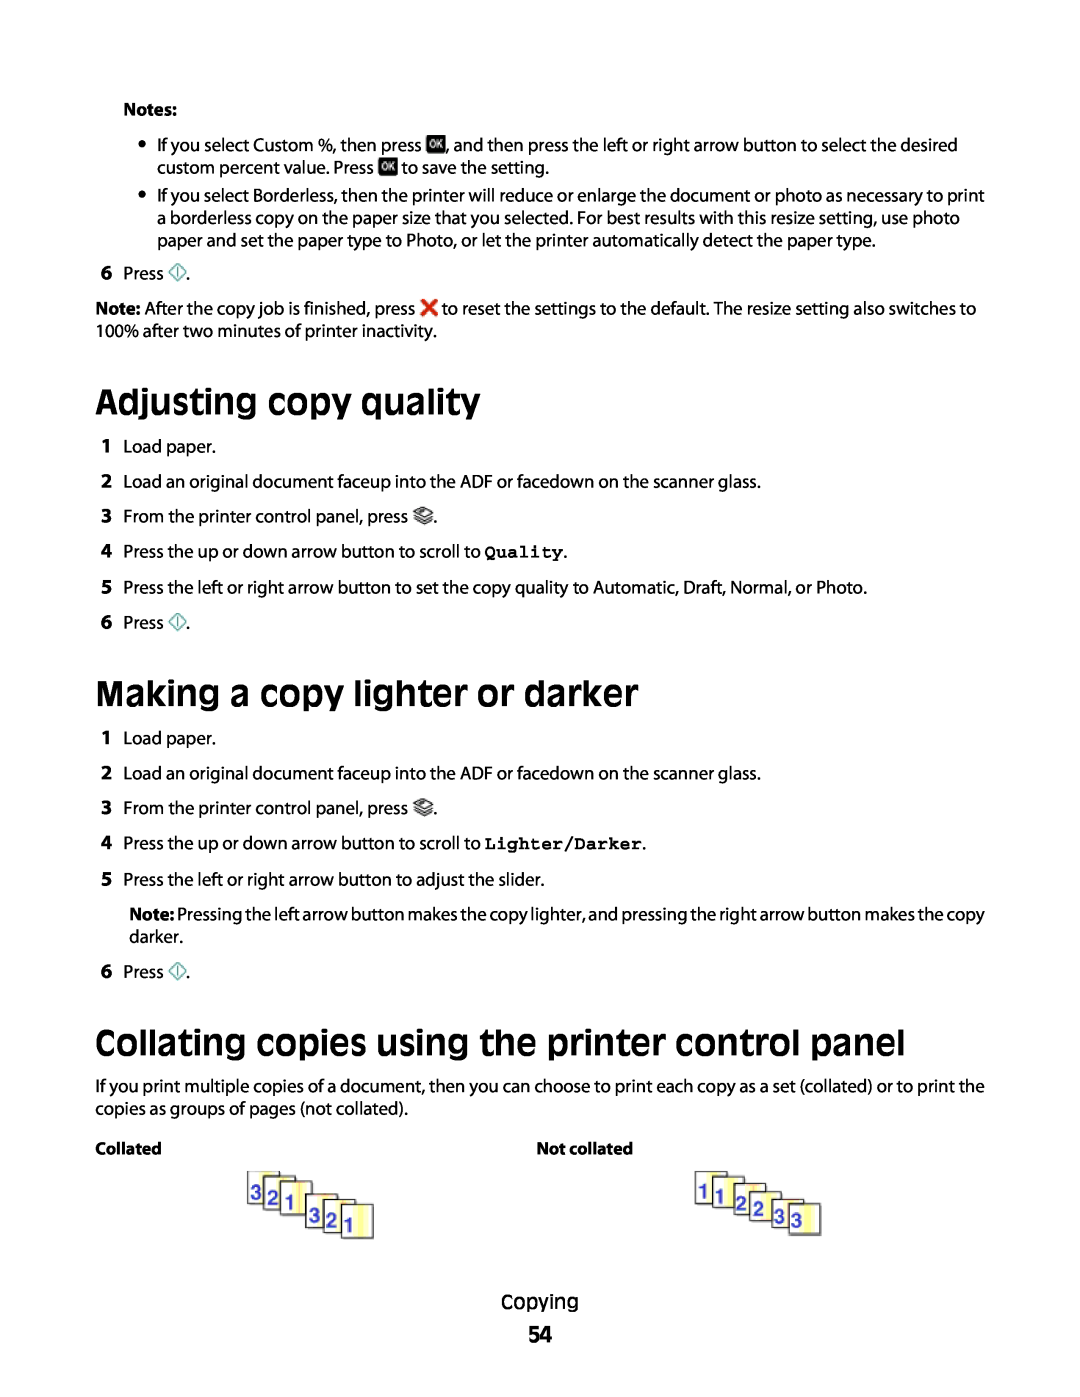 Lexmark S500 Adjusting copy quality, Making a copy lighter or darker, Collating copies using the printer control panel 